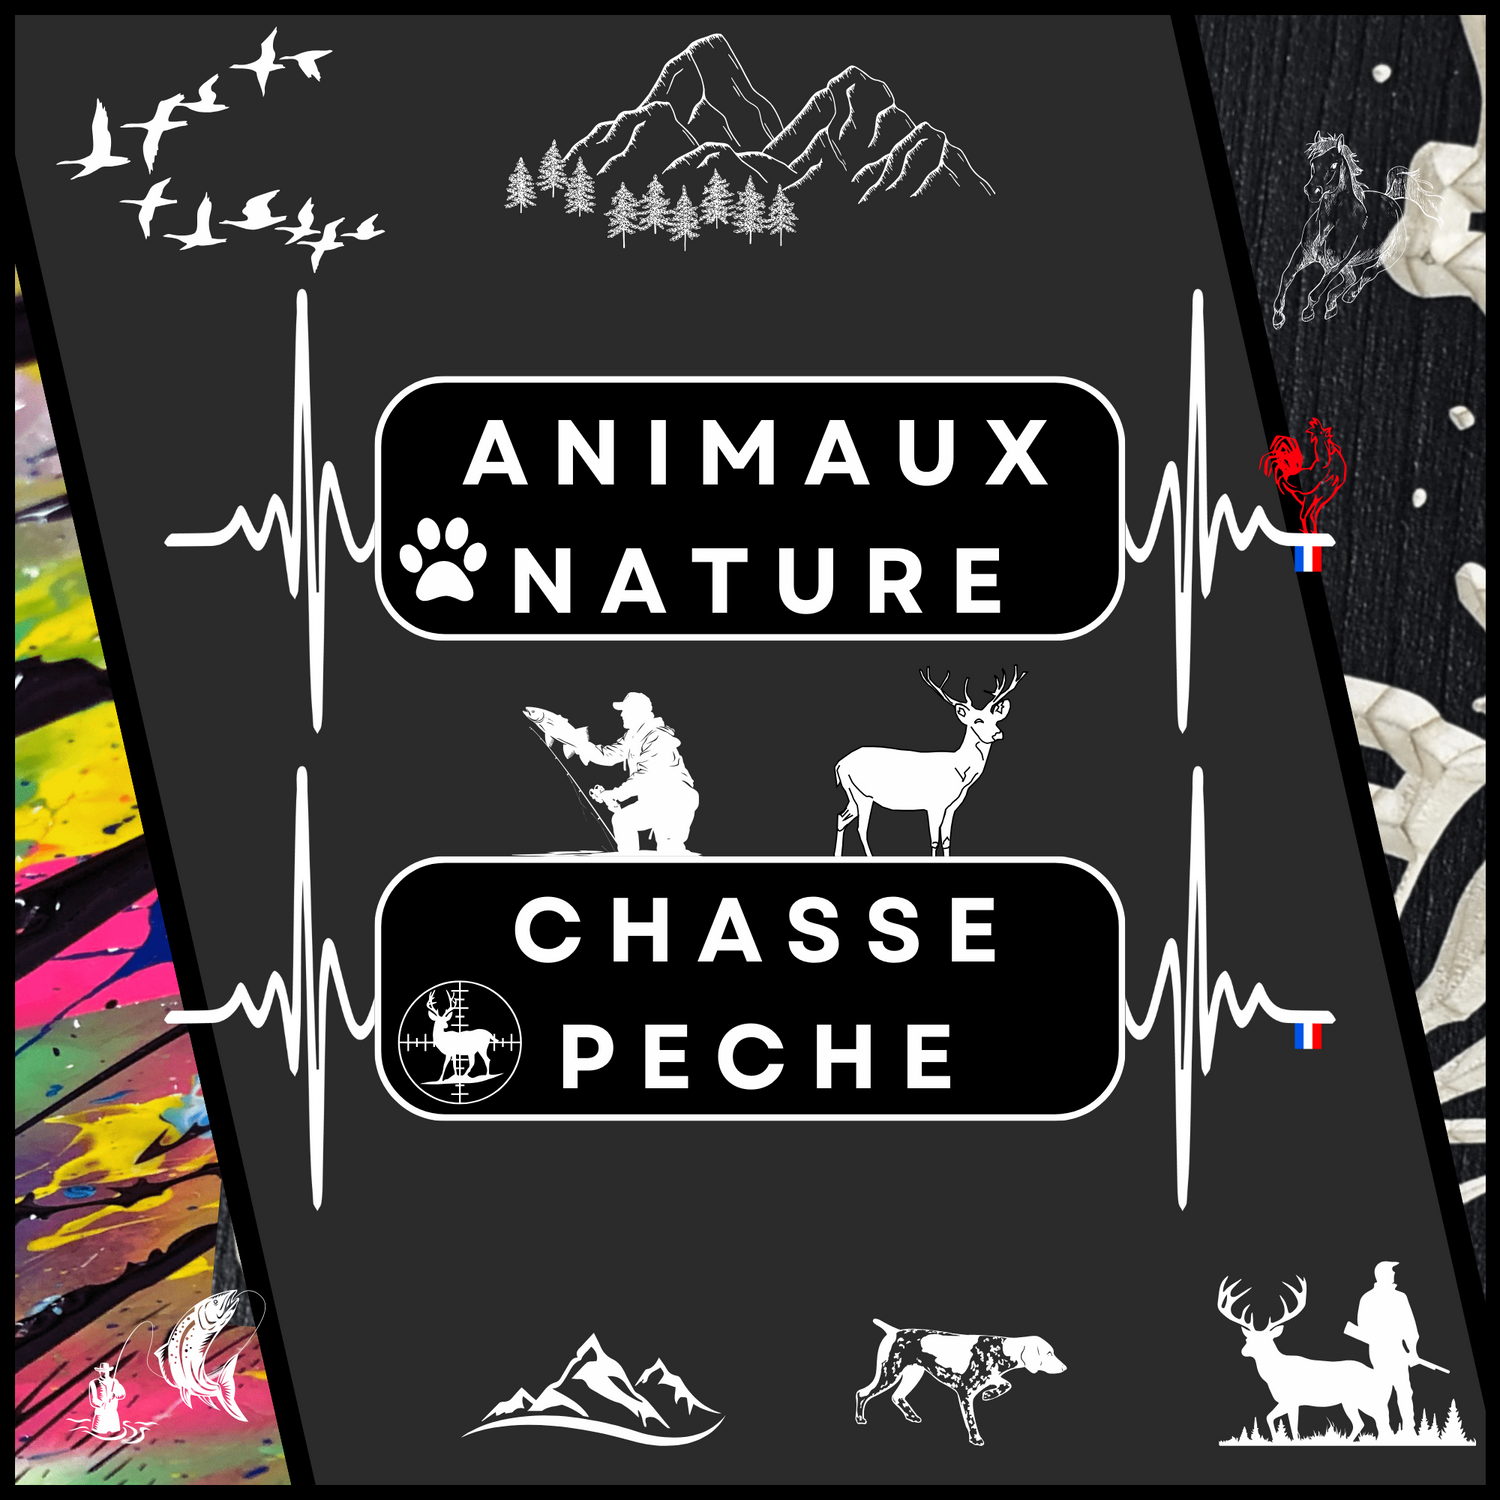 Animaux, nature, chasse et pêche